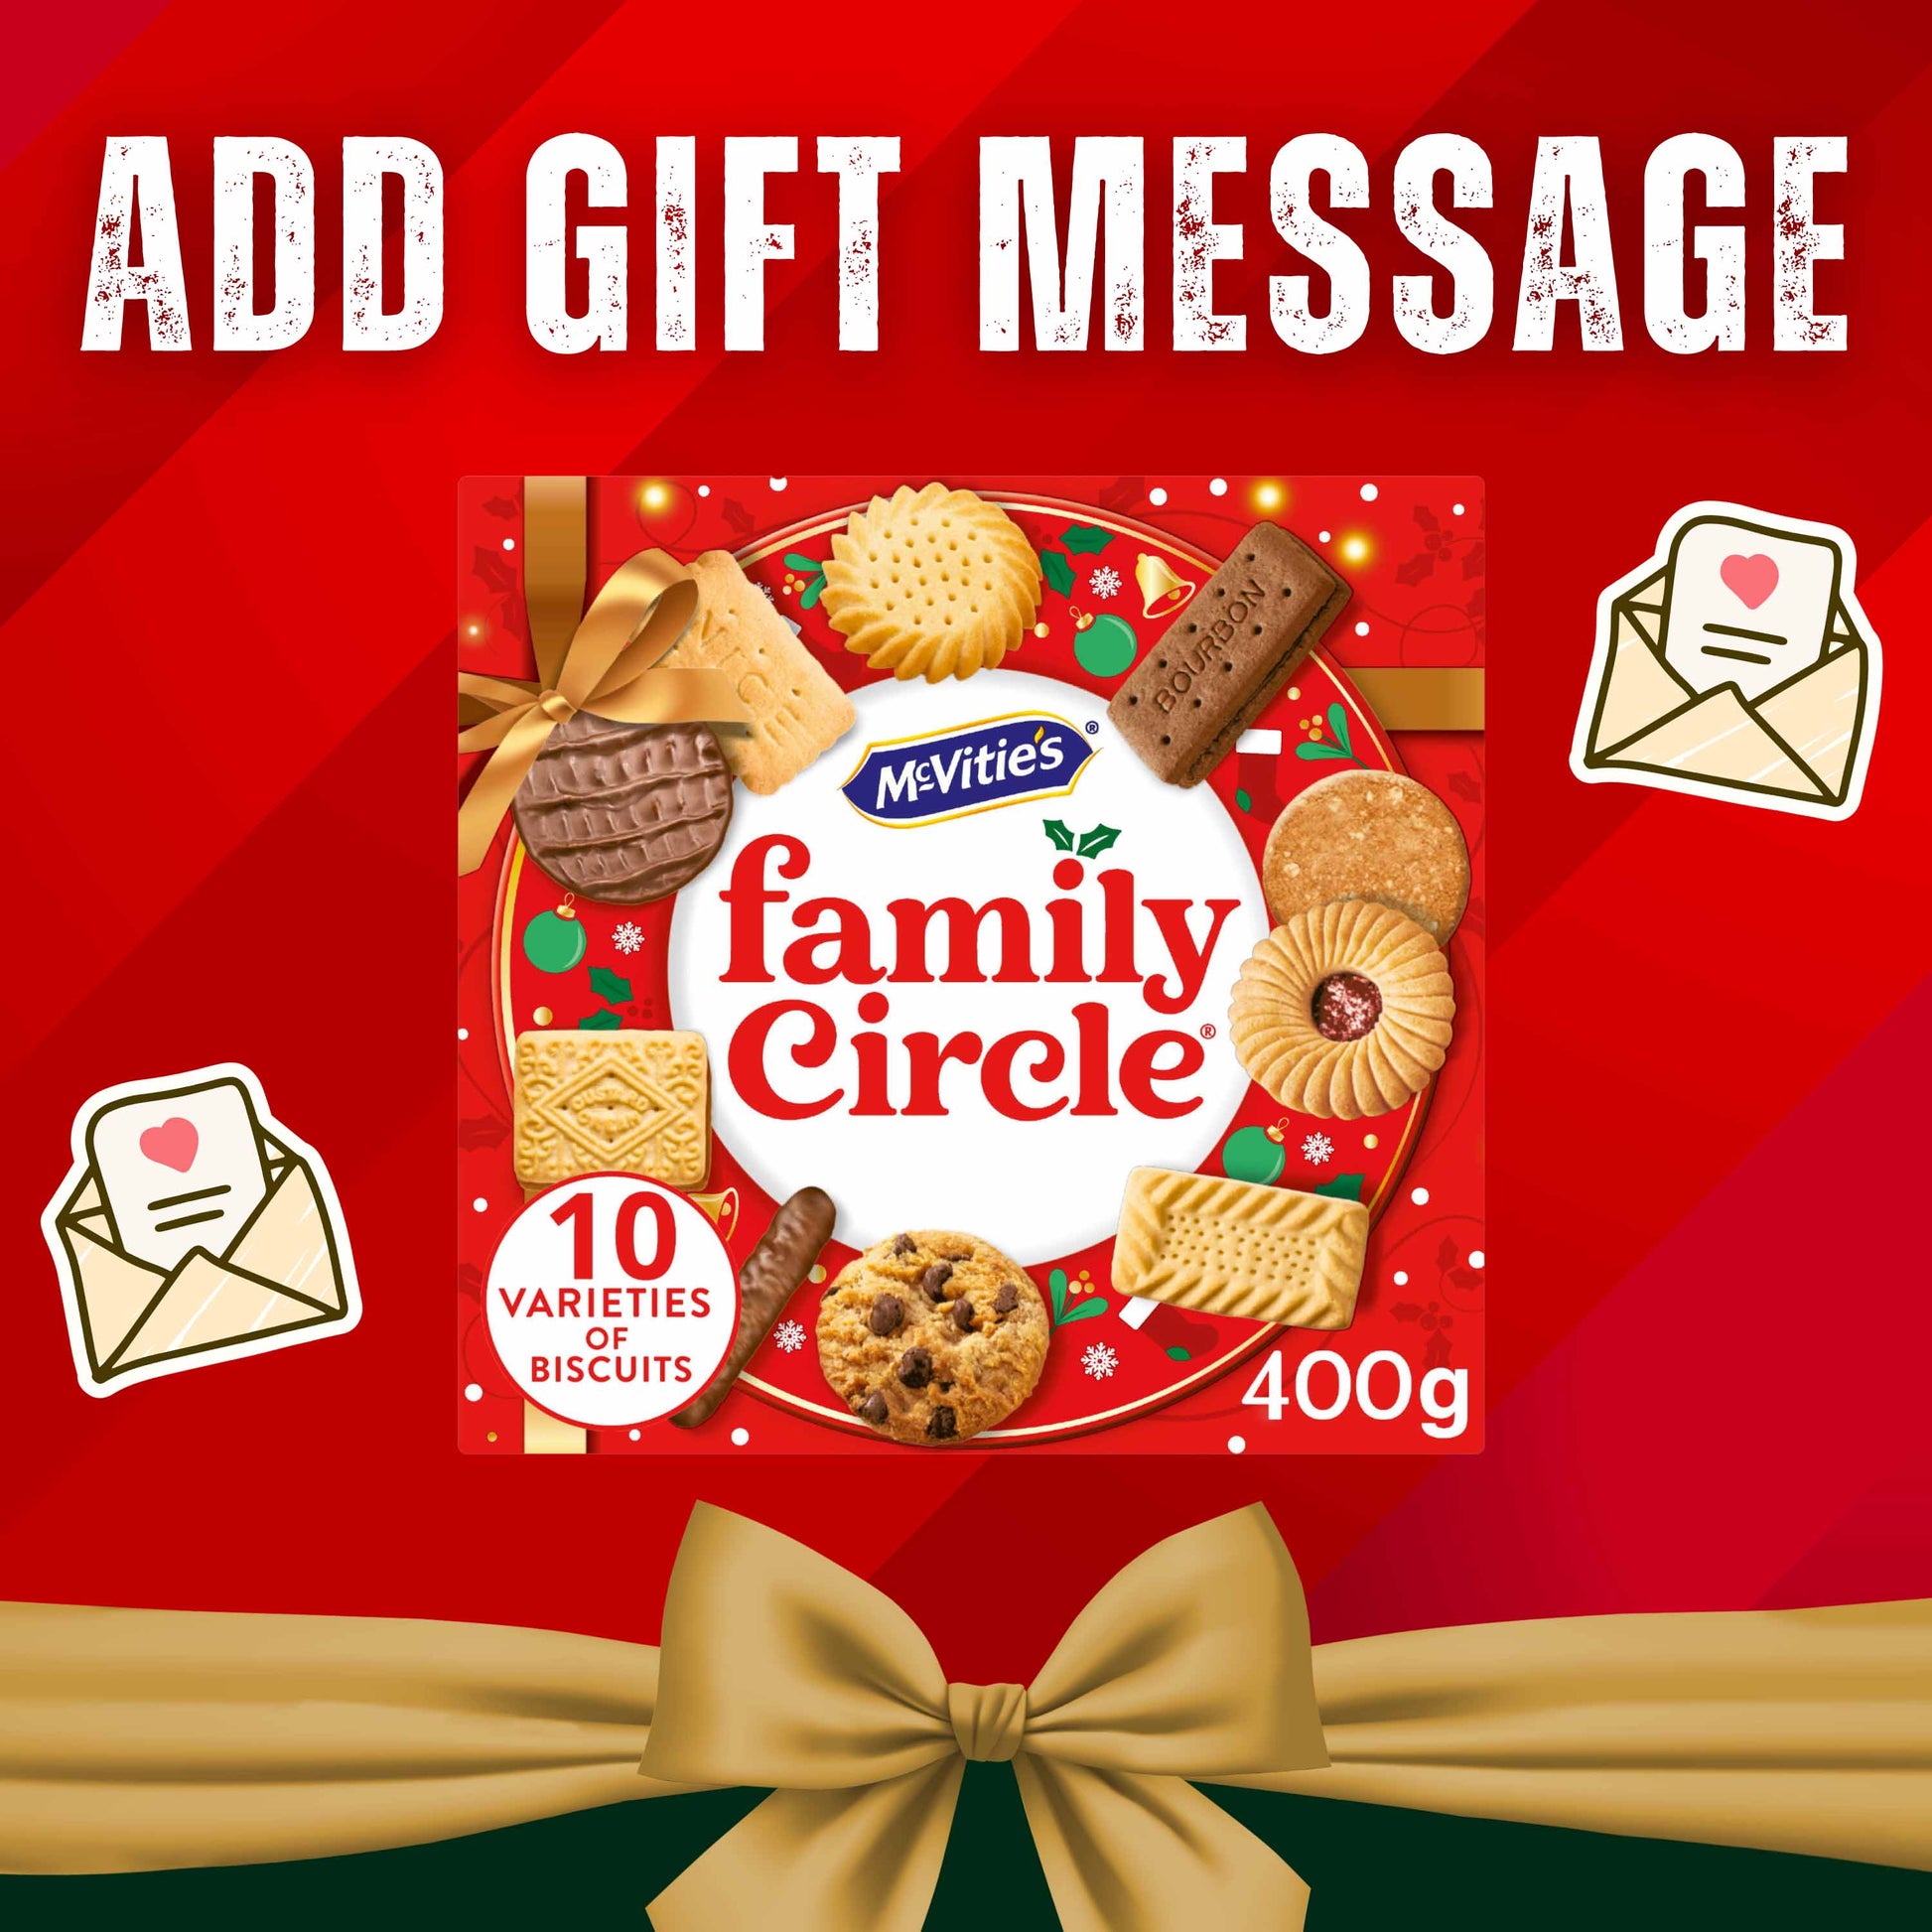 McVitie's Family Circle Biscuit Selection Variety Assortment 400g - British Snacks - Gift Message